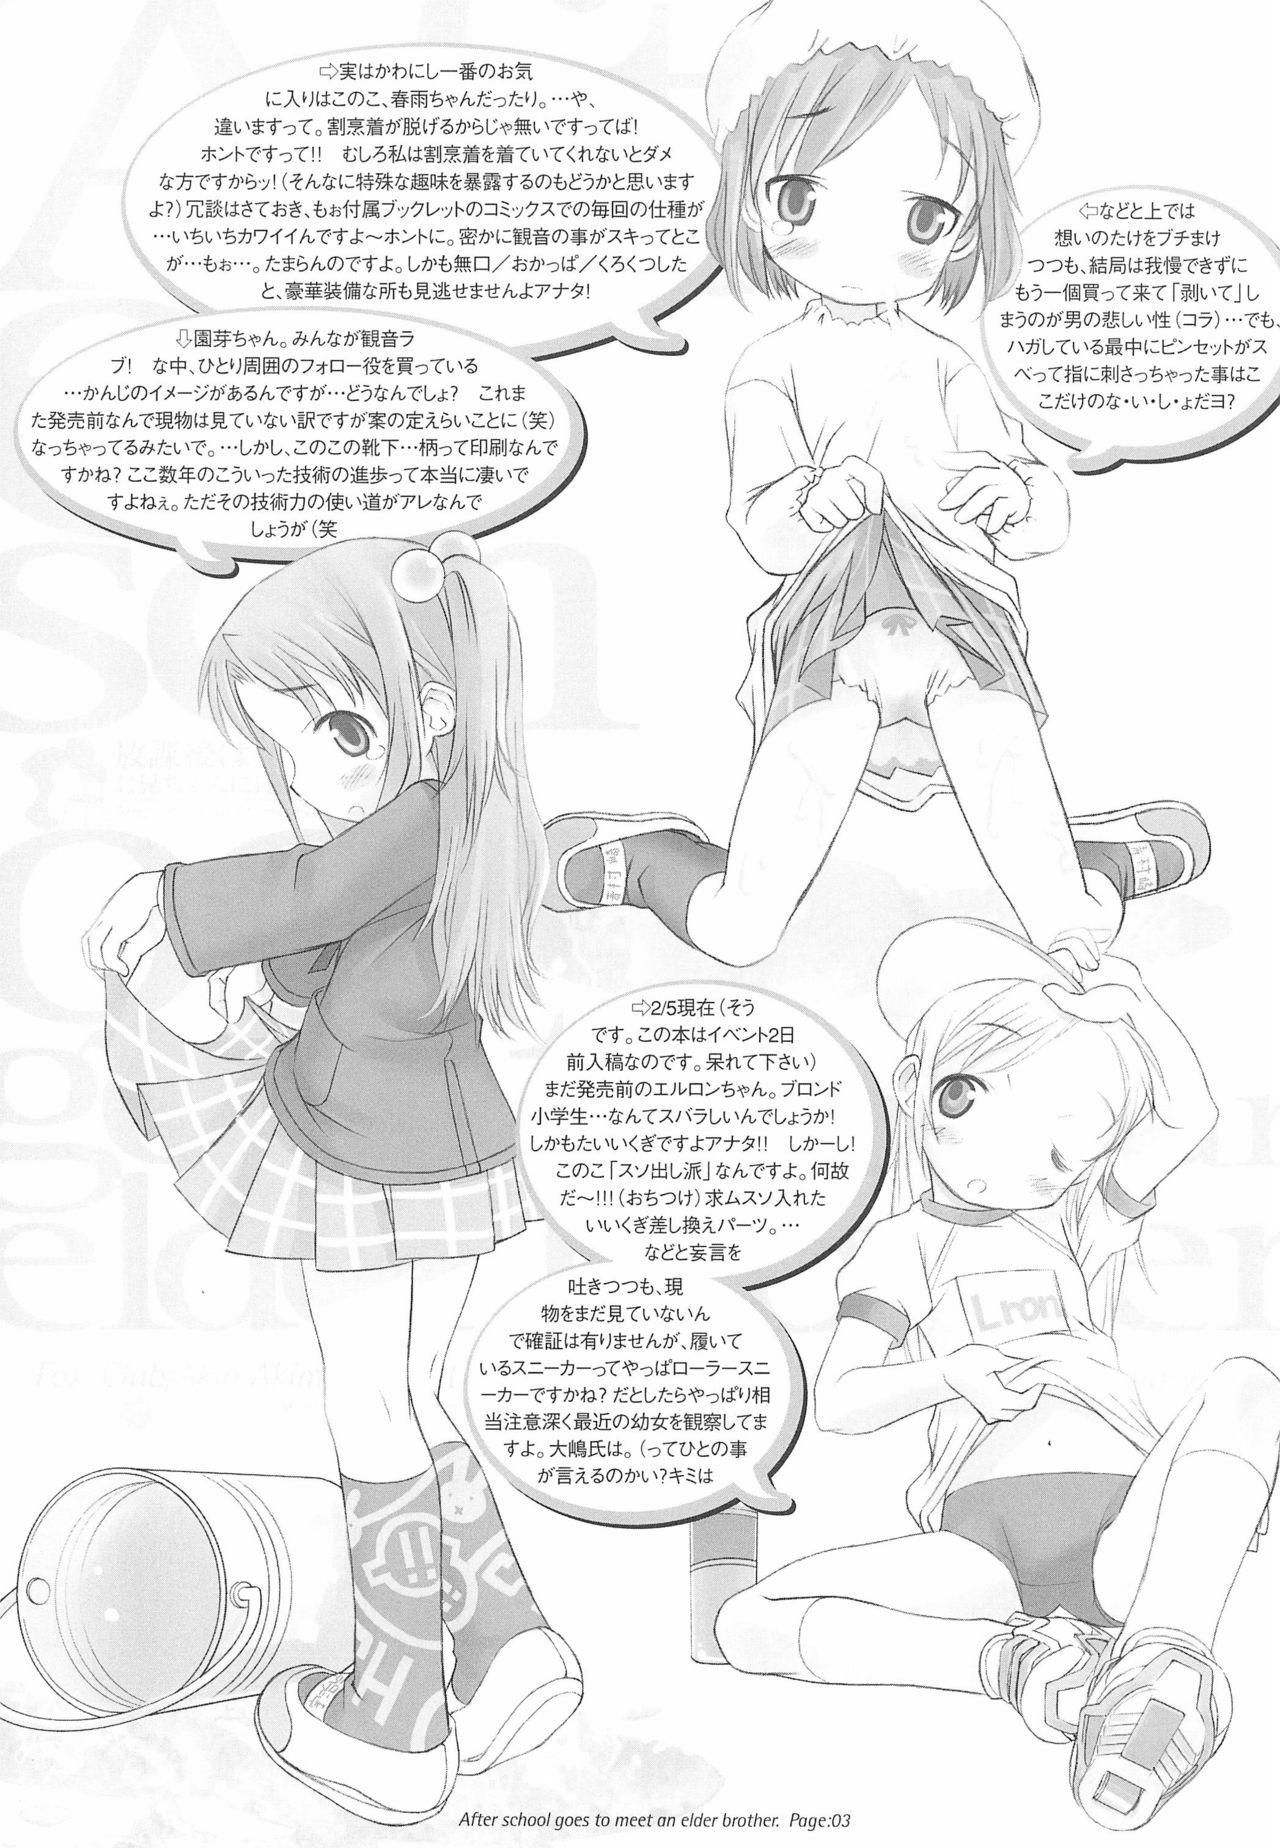 Threesome After School Goes To Meet An Elder Brother - Shuukan watashi no onii-chan | weekly dearest my brother Amateurs - Page 3